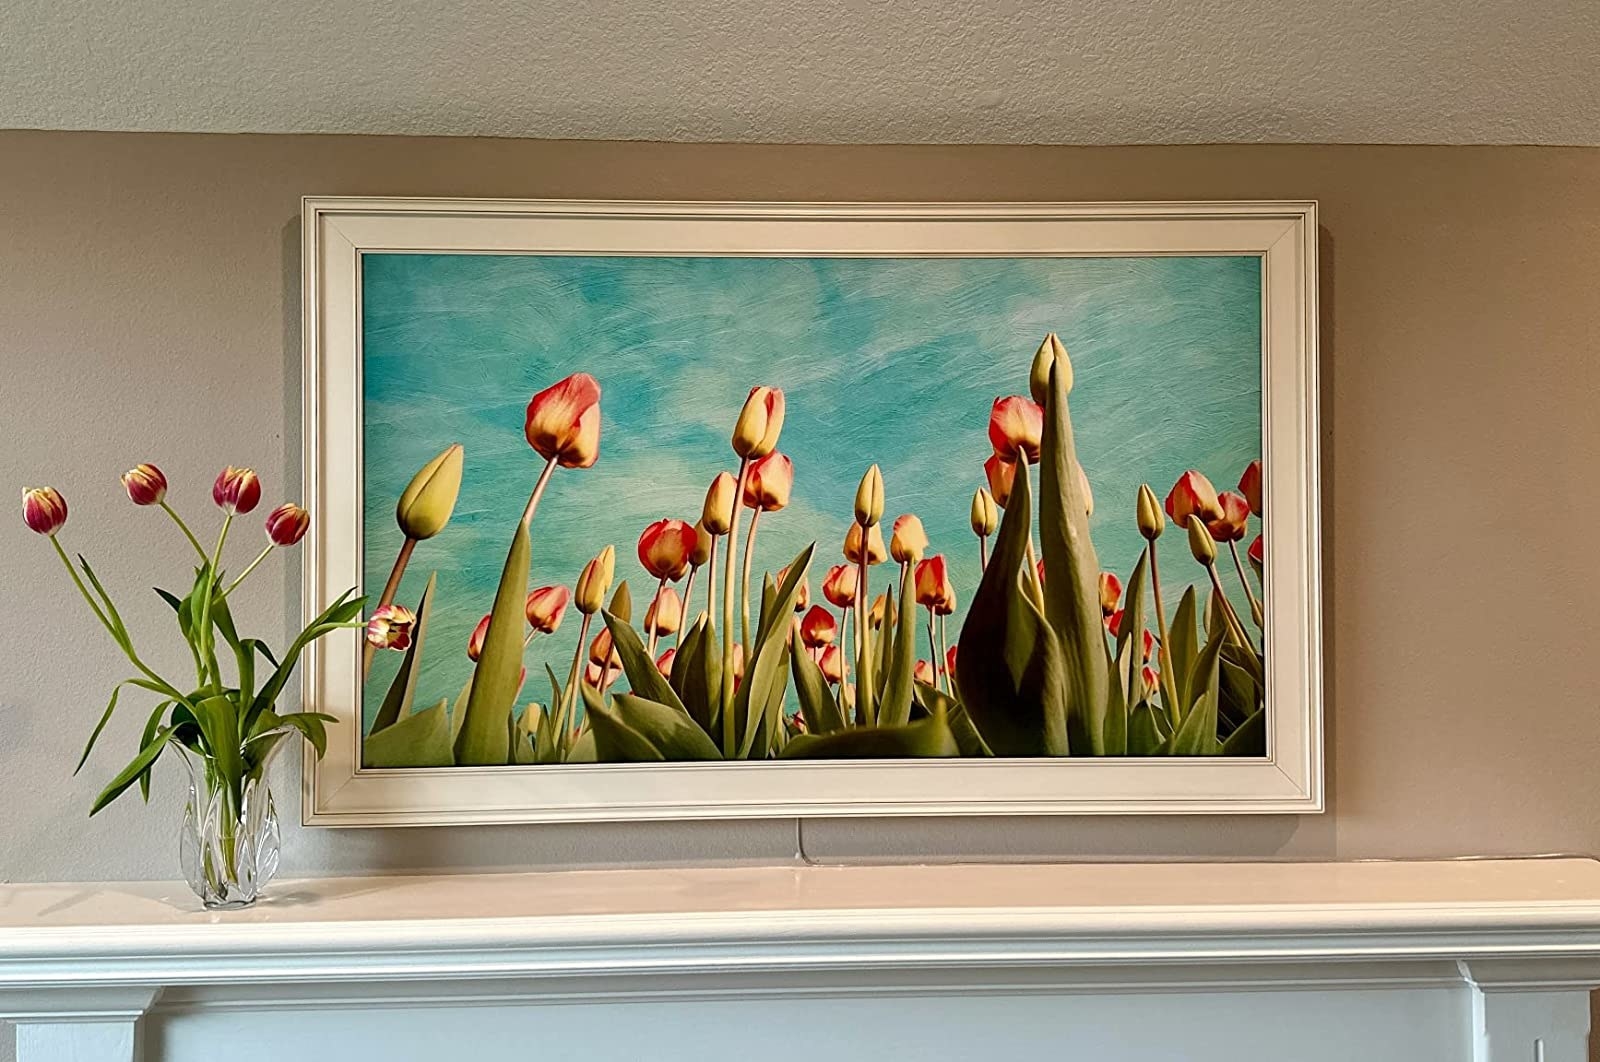 a review photo of the television hung over a mantle with a picture of flowers that looks like a painting